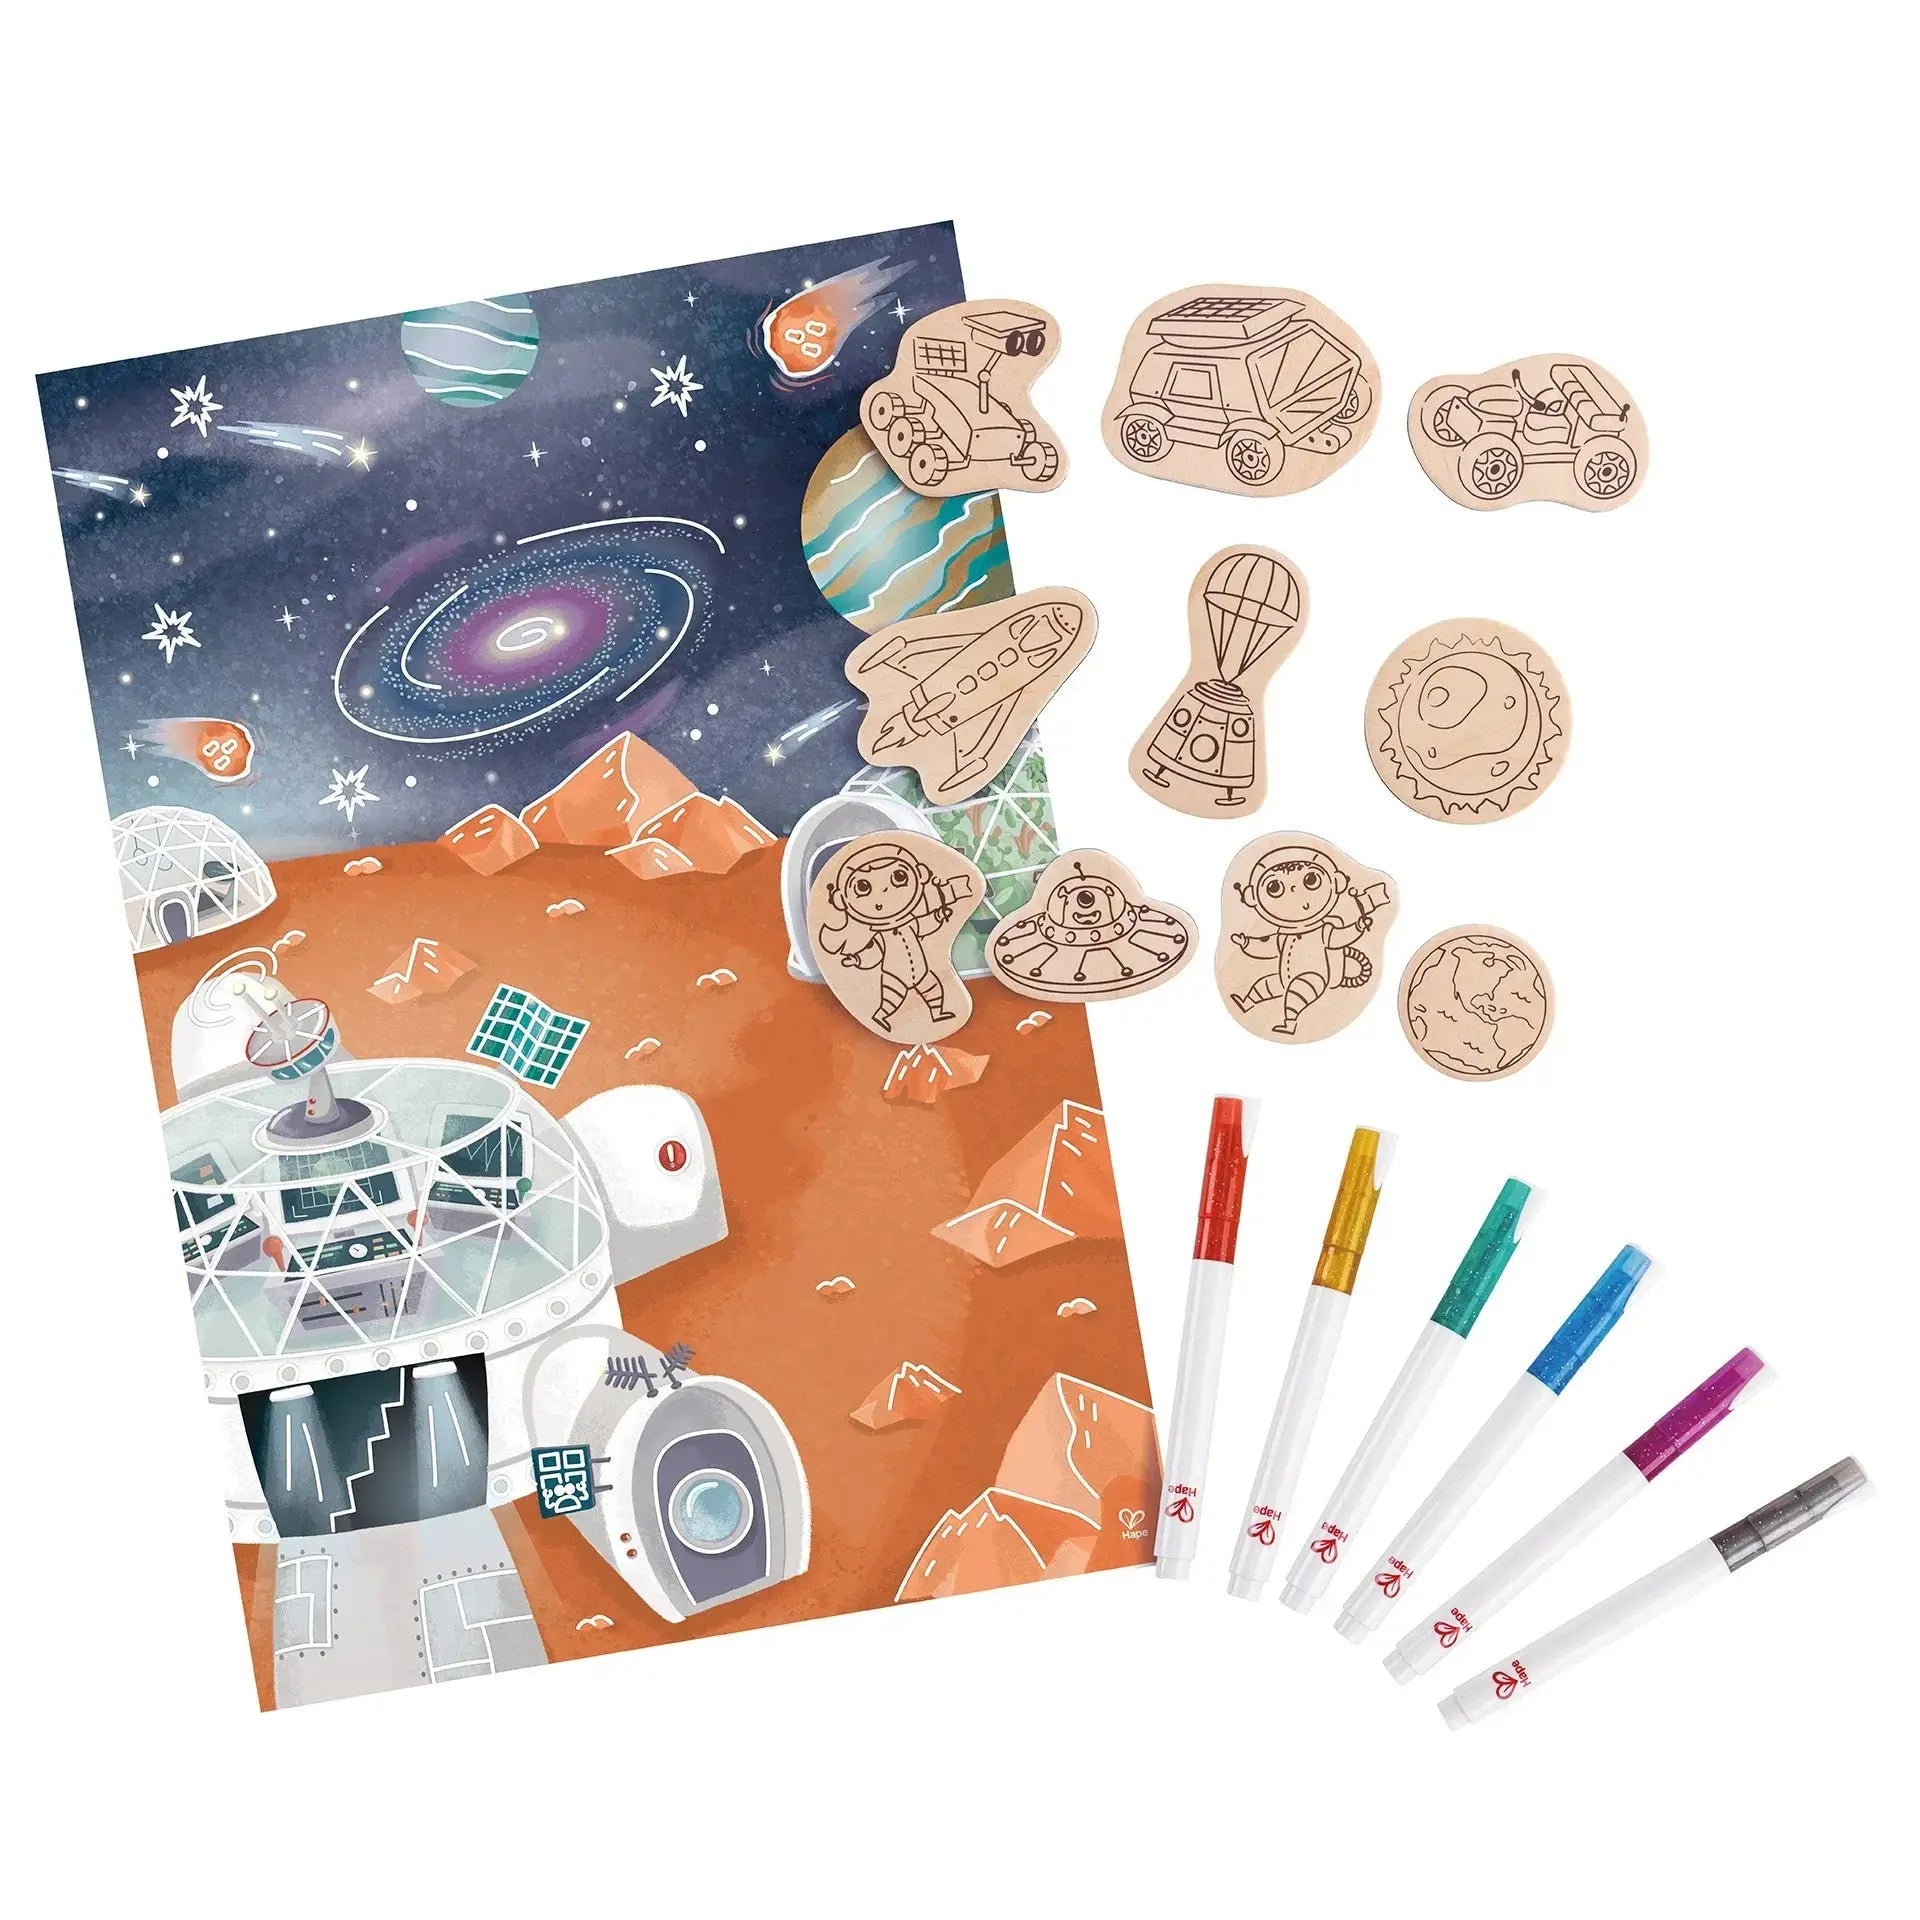 Scratch and Sketch (Solar System) - Family Fun Hobbies